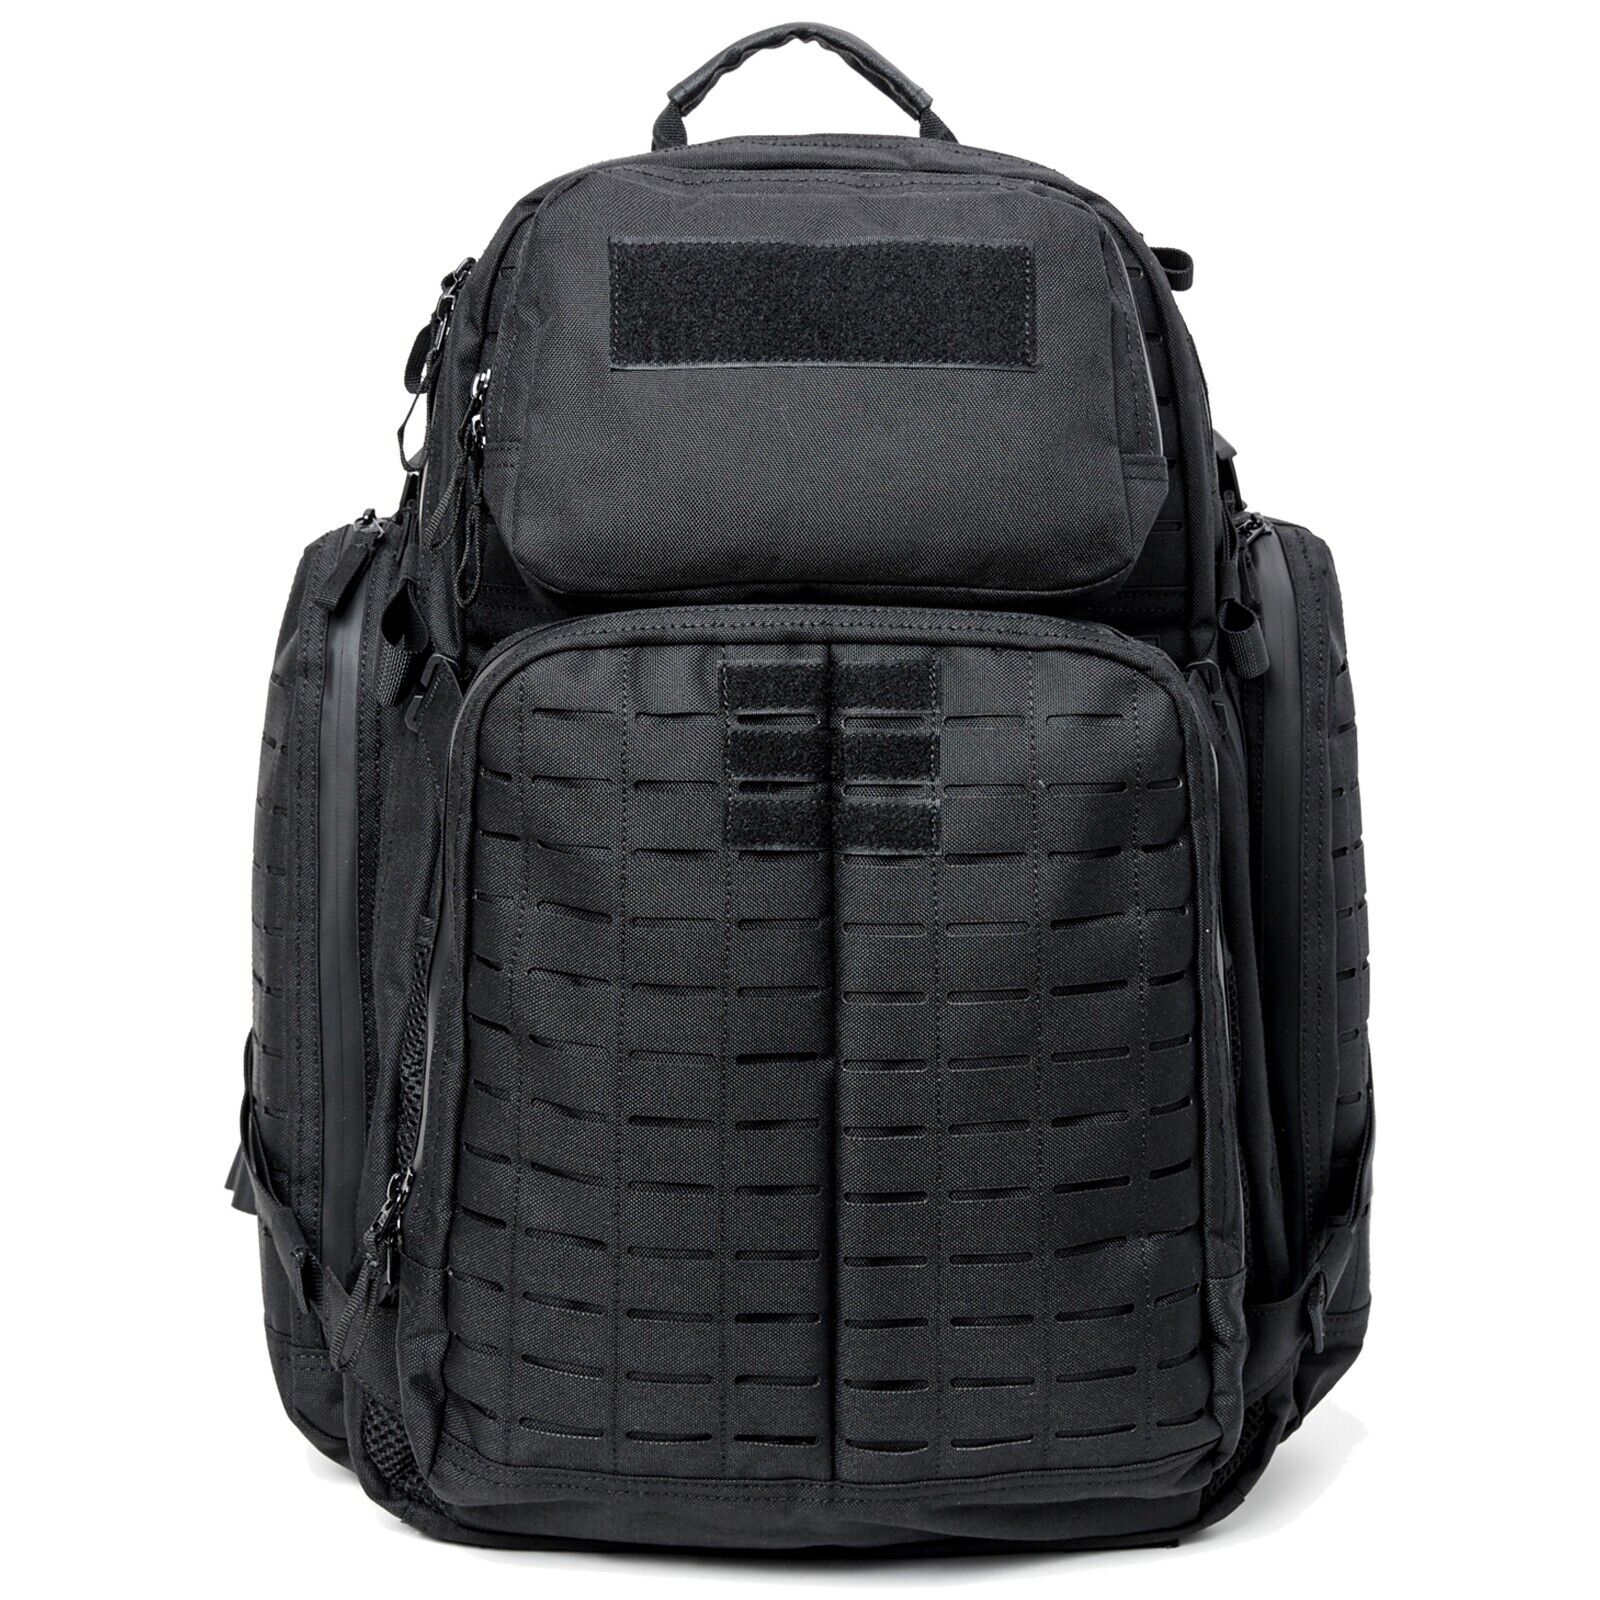 MT Military Rucksack MOLLE Army Tactical Assault Backpack 72 Pack Black